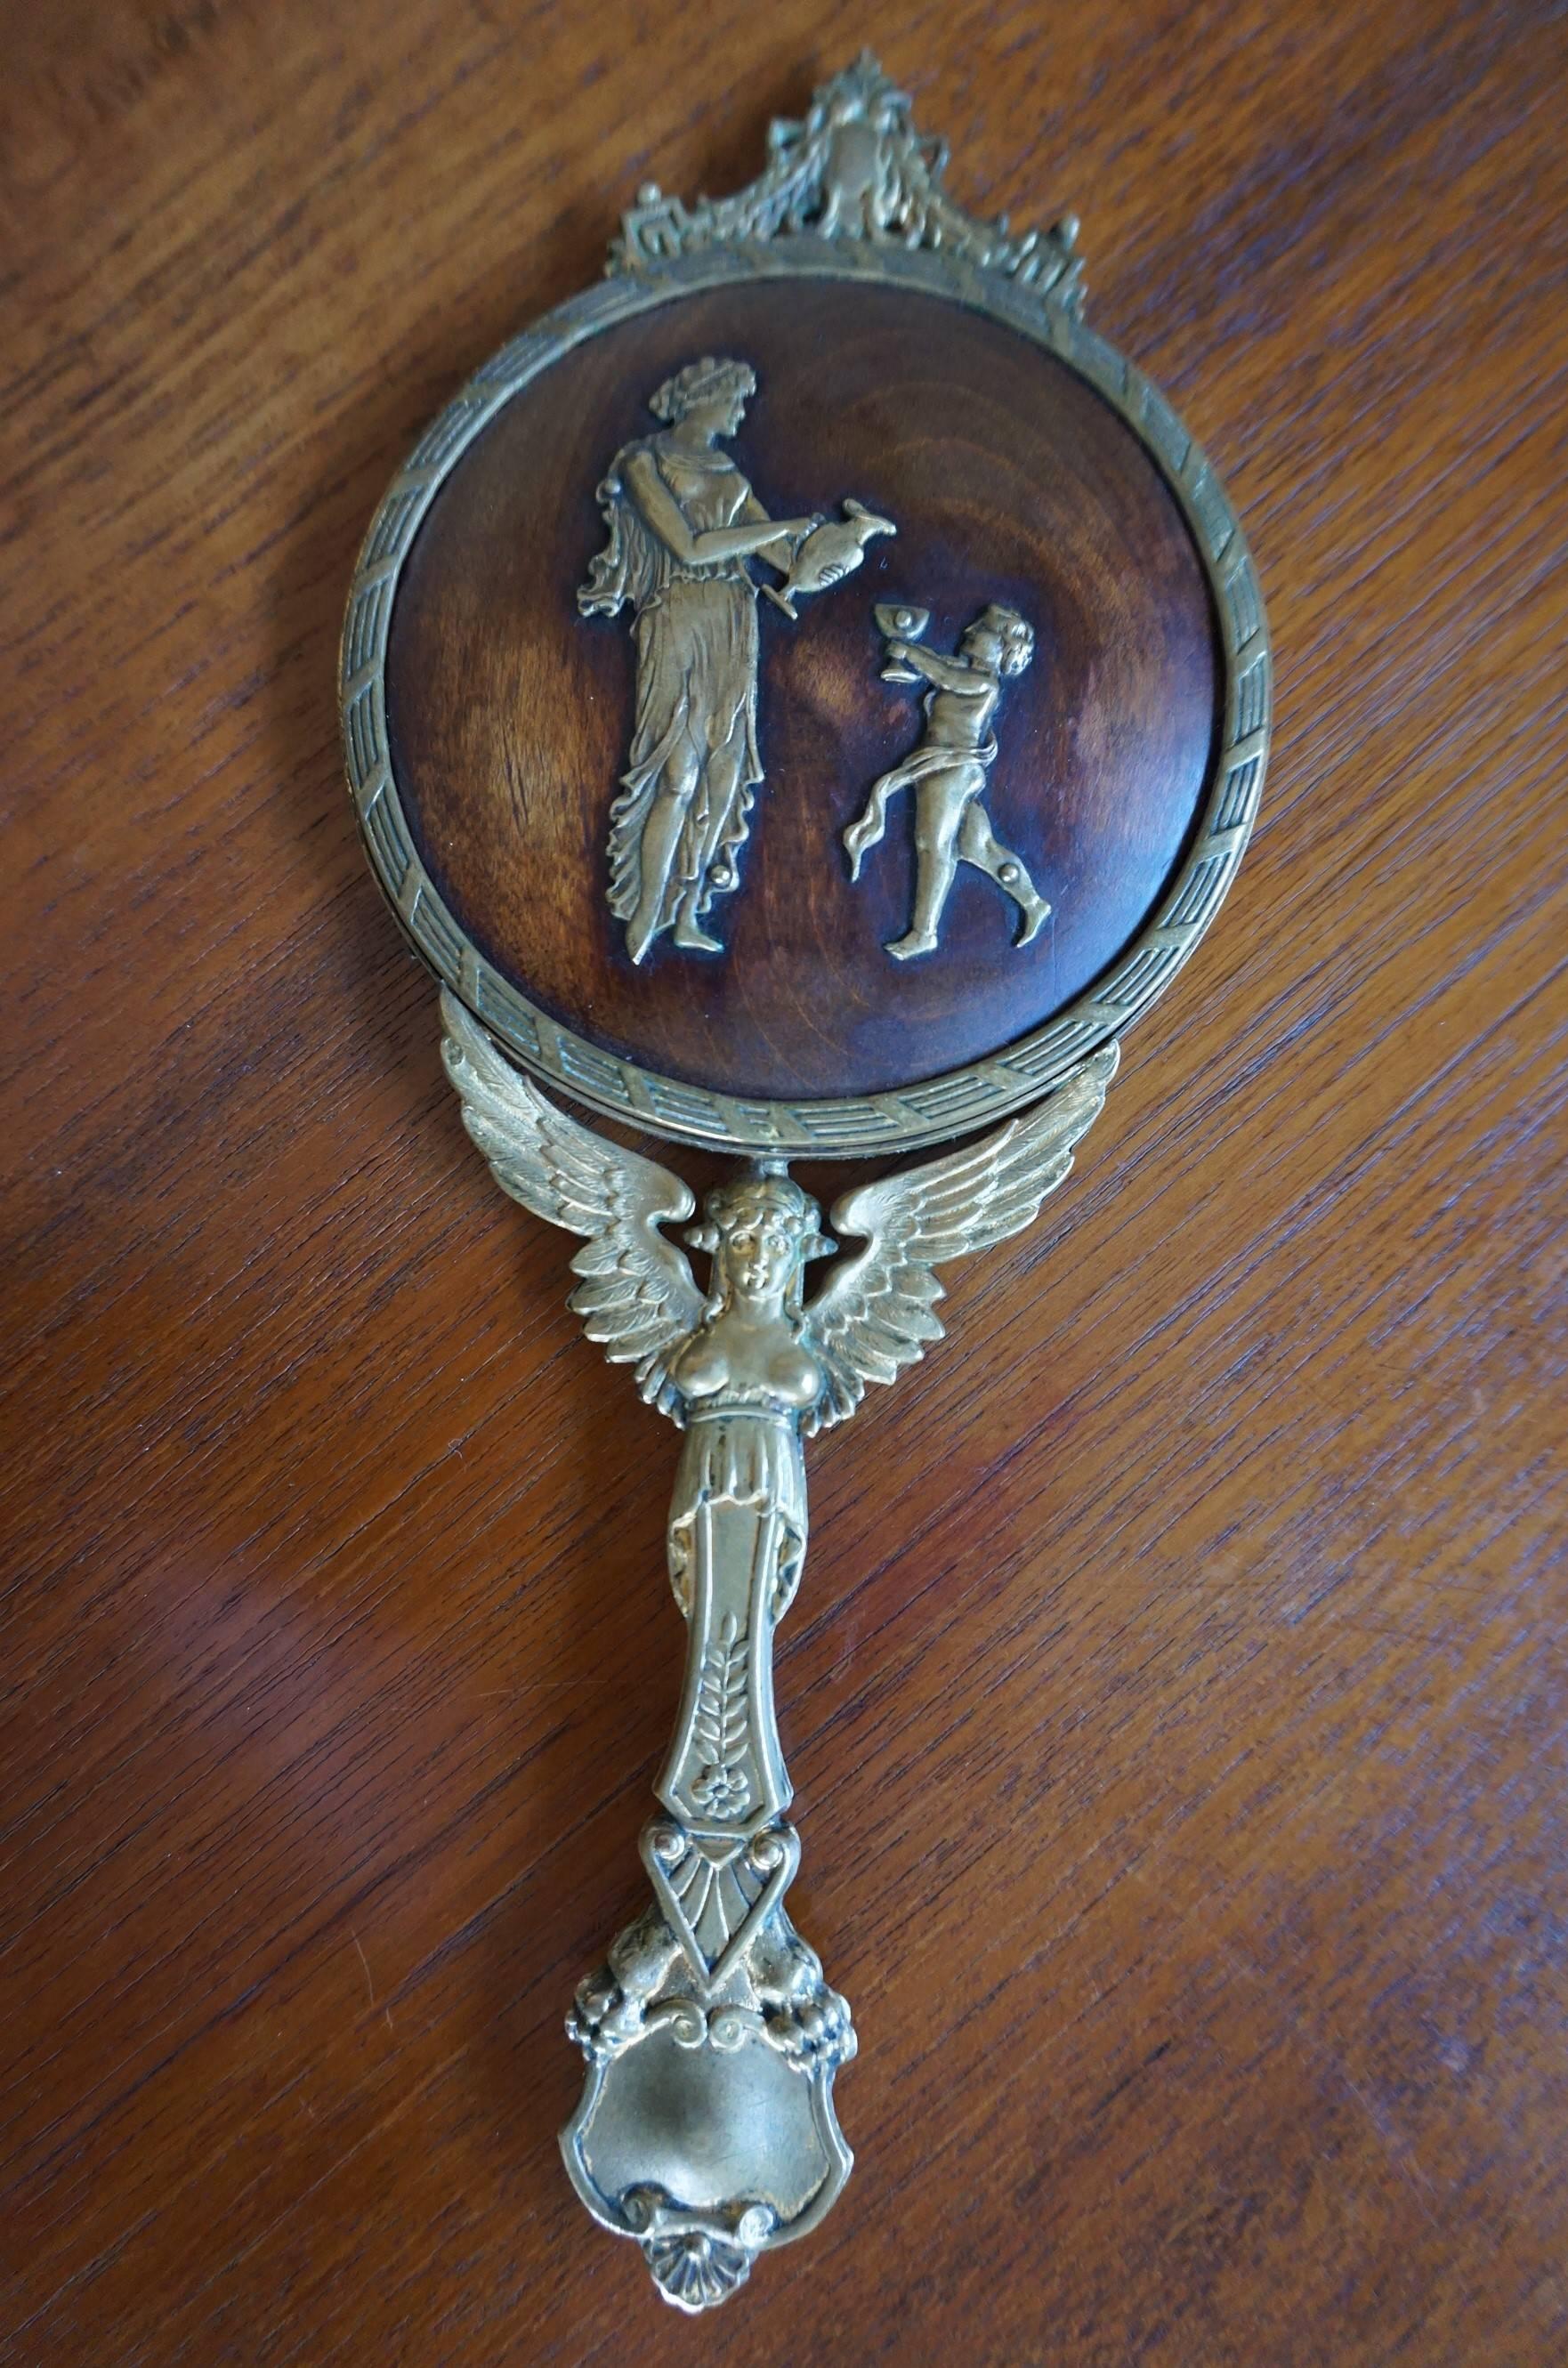 Small but striking little hand-mirror with beveled glass.

If you are looking for a unique gift for yourself or a loved one then this rare Empire style hand mirror could be perfect for you. Both the handle and the ring around the circular, beveled